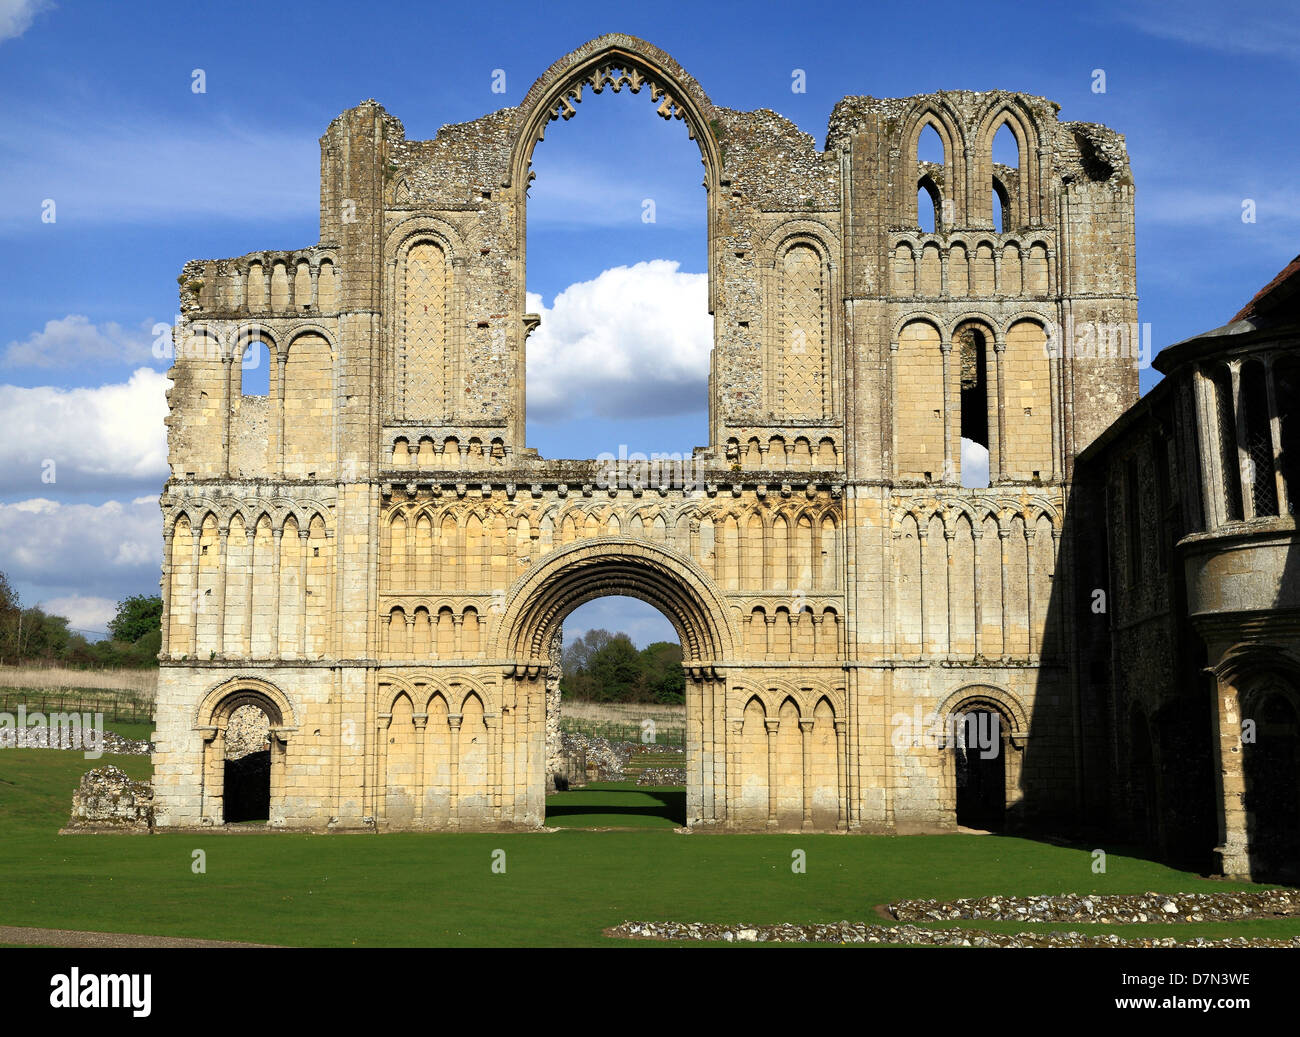 Castle Acre Priory, Norfolk, west front of Priory Church, England UK, Norman romanesque architecture, English priories, ruins Stock Photo